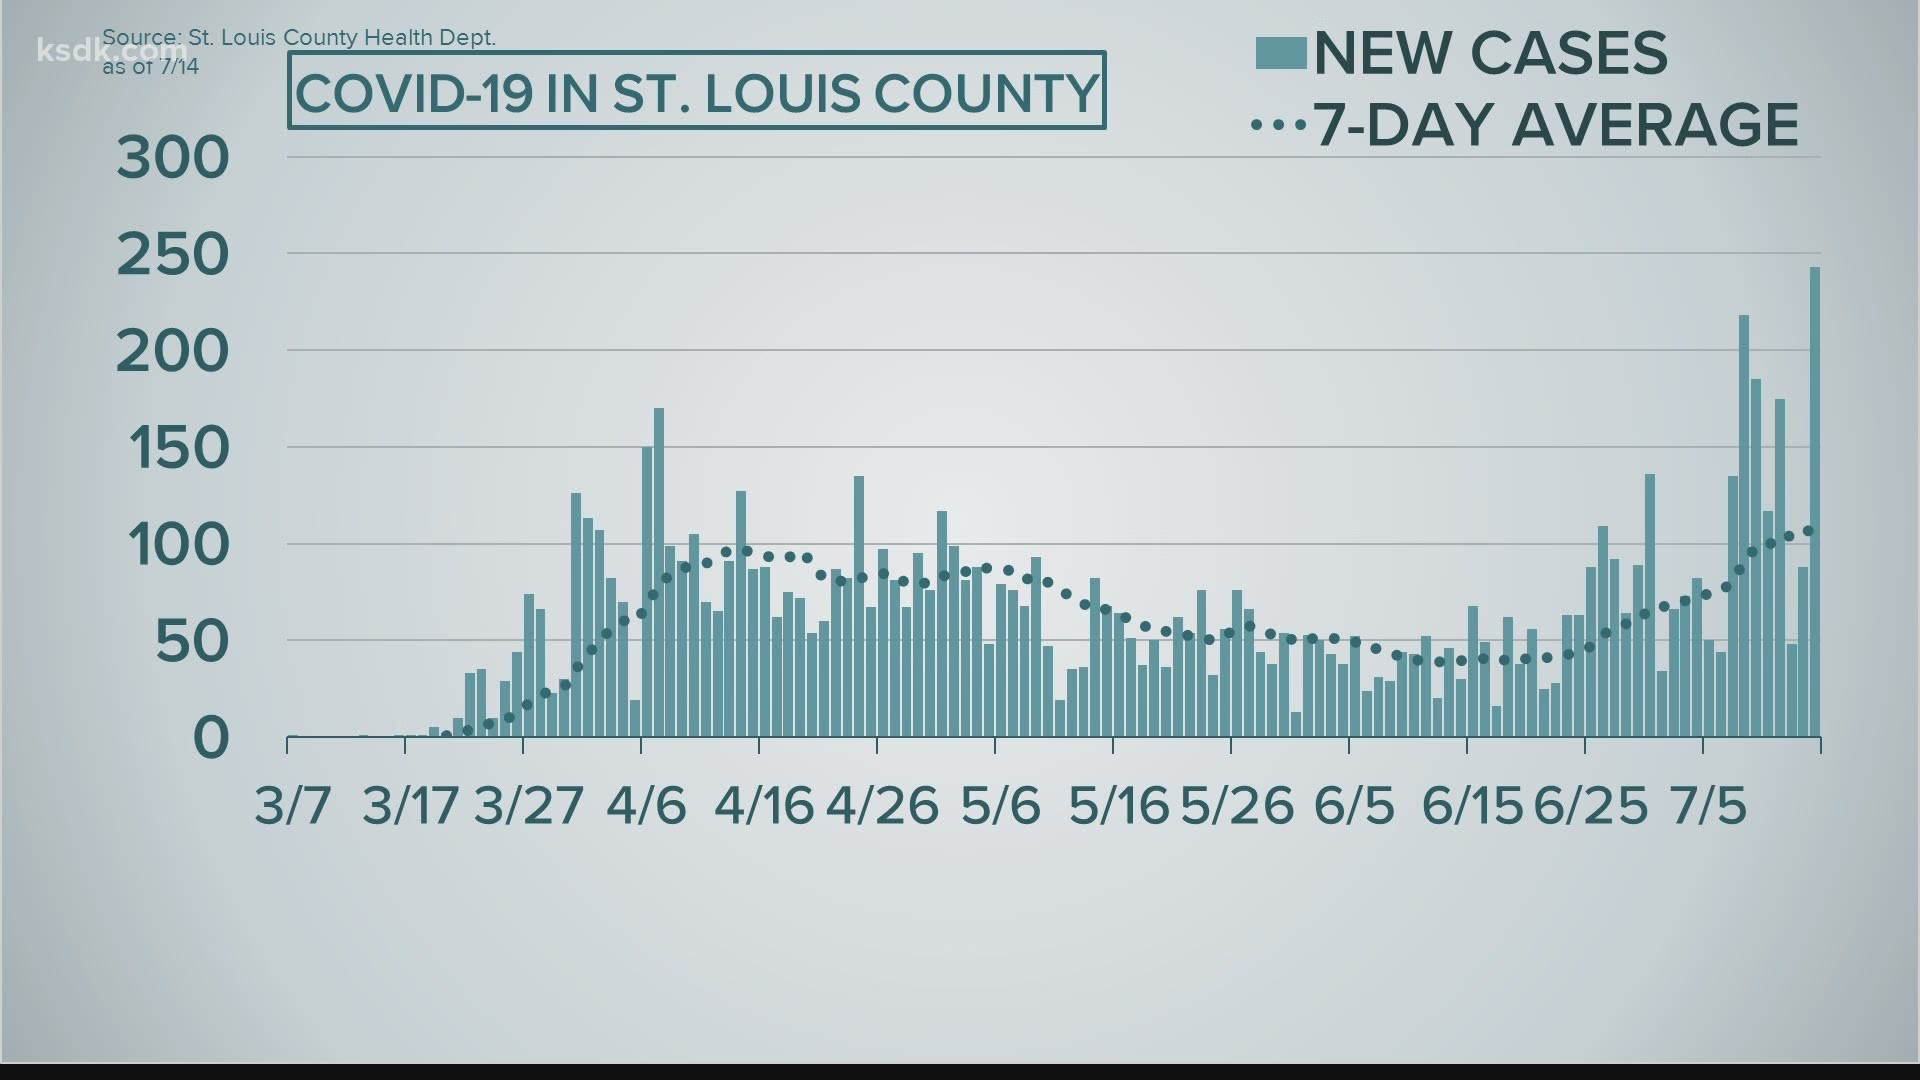 St. Louis County is looking to bring in more contact tracers as the area reaches an all-time high of coronavirus cases.